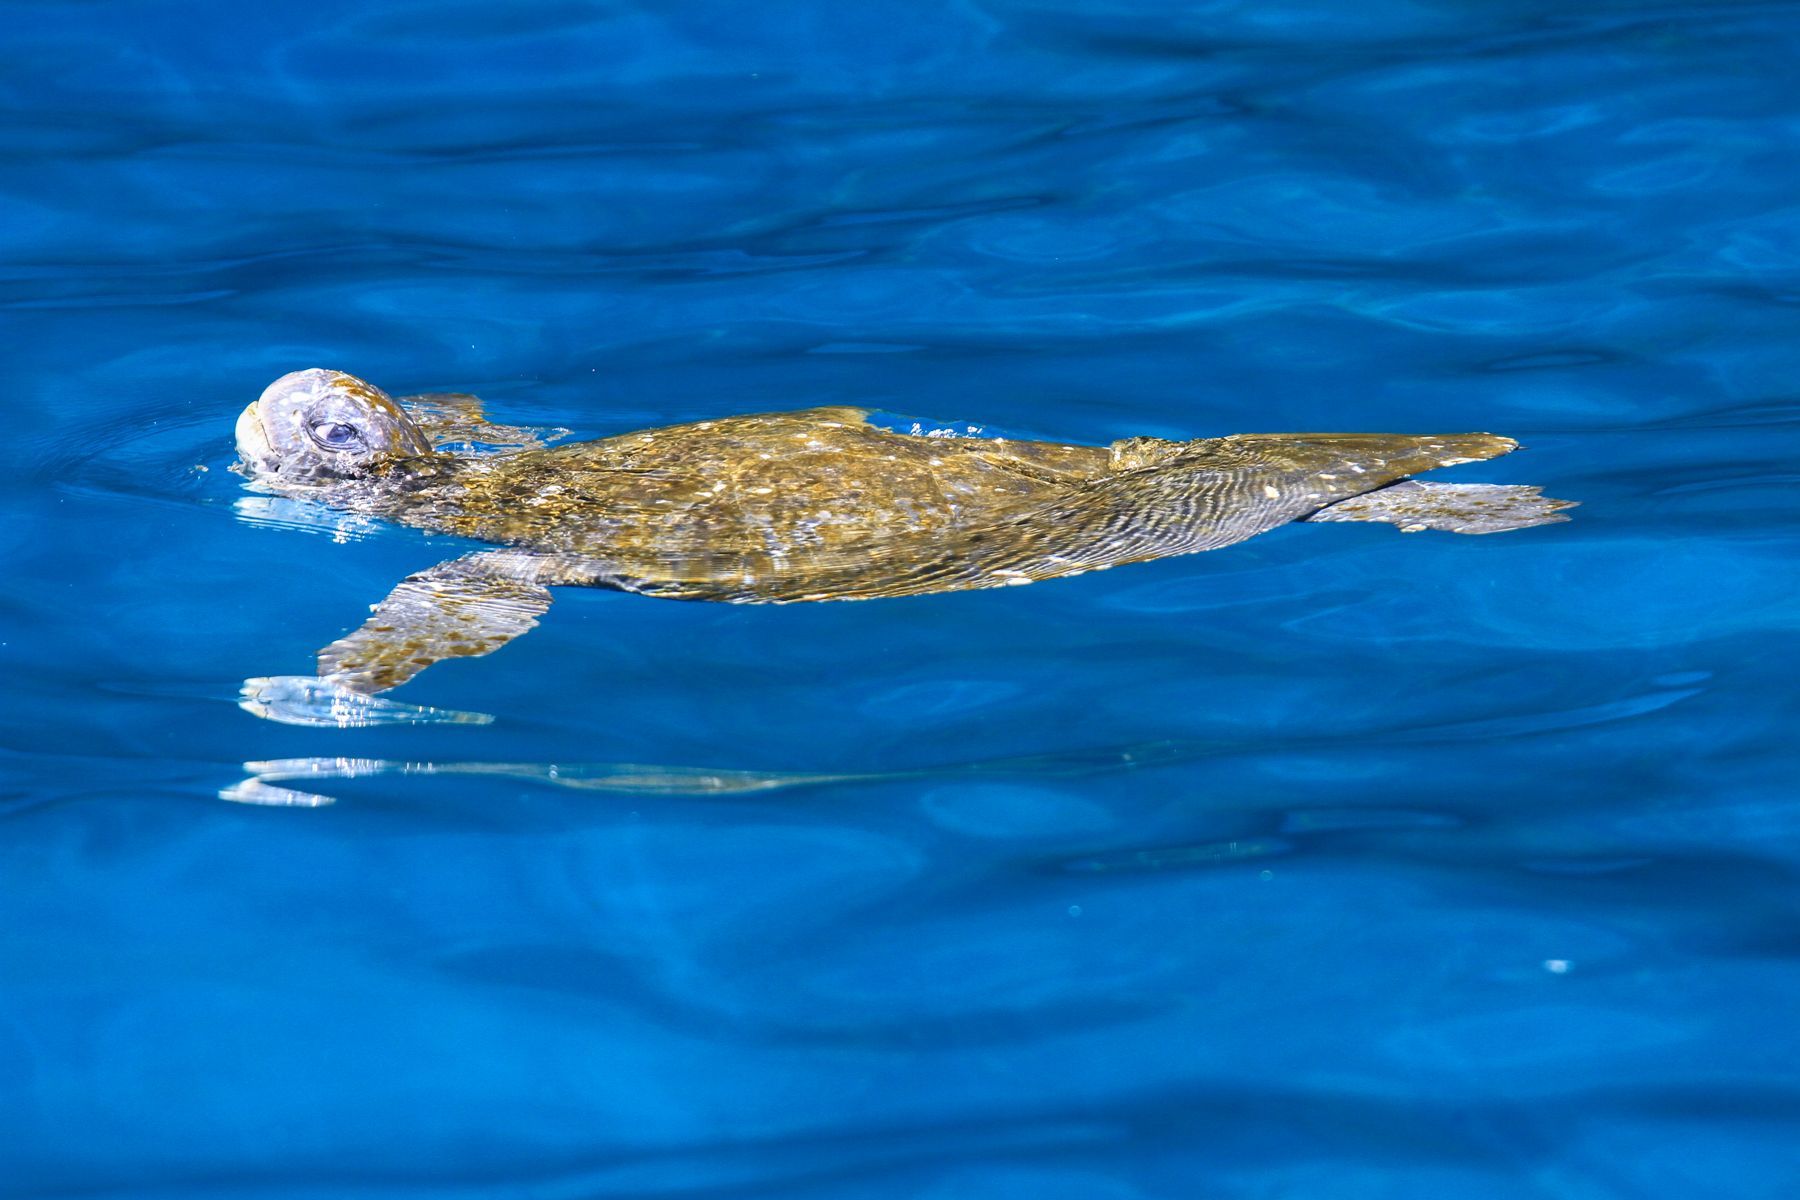 A Green Turtle swims past our yacht in the crystal clear Galapagos water